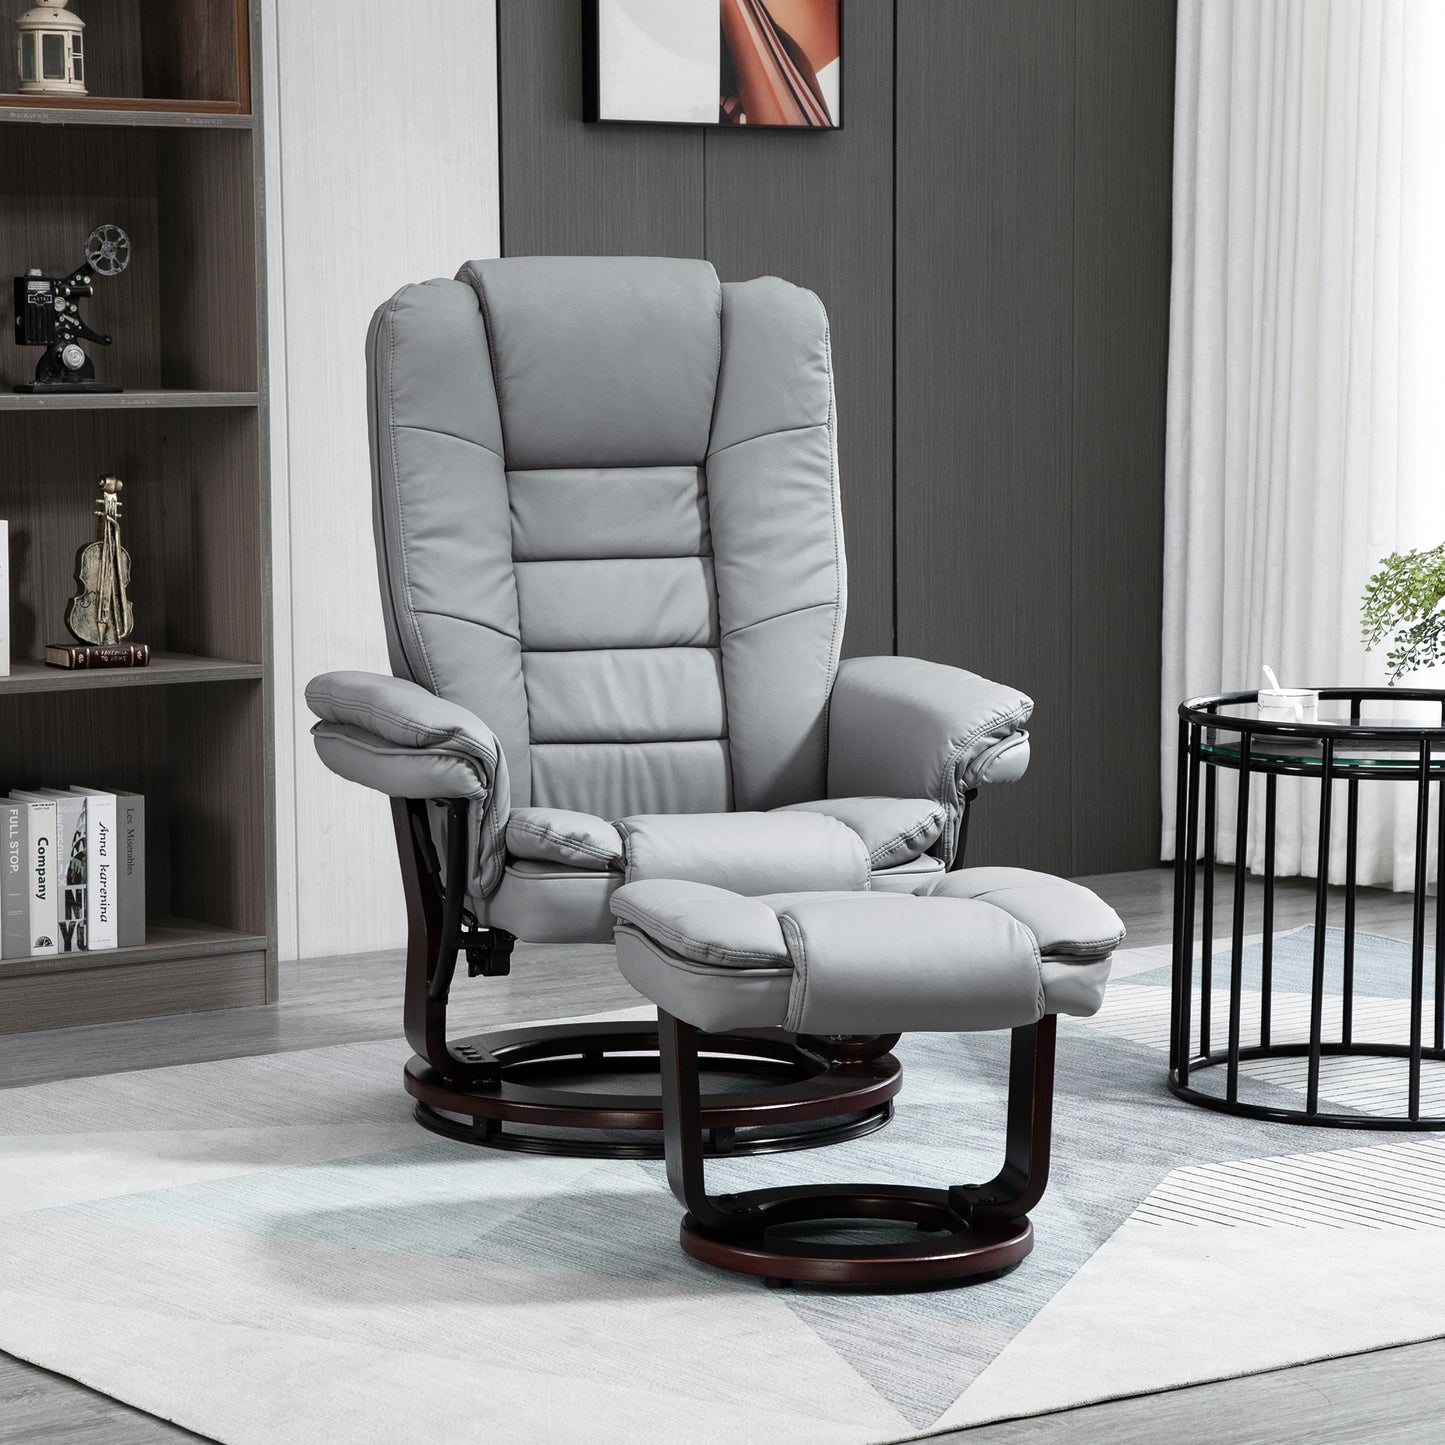 HOMCOM Manual Recliner and Footrest Set PU Leather Leisure Lounge Chair Armchair with Swivel Wood Base, Grey